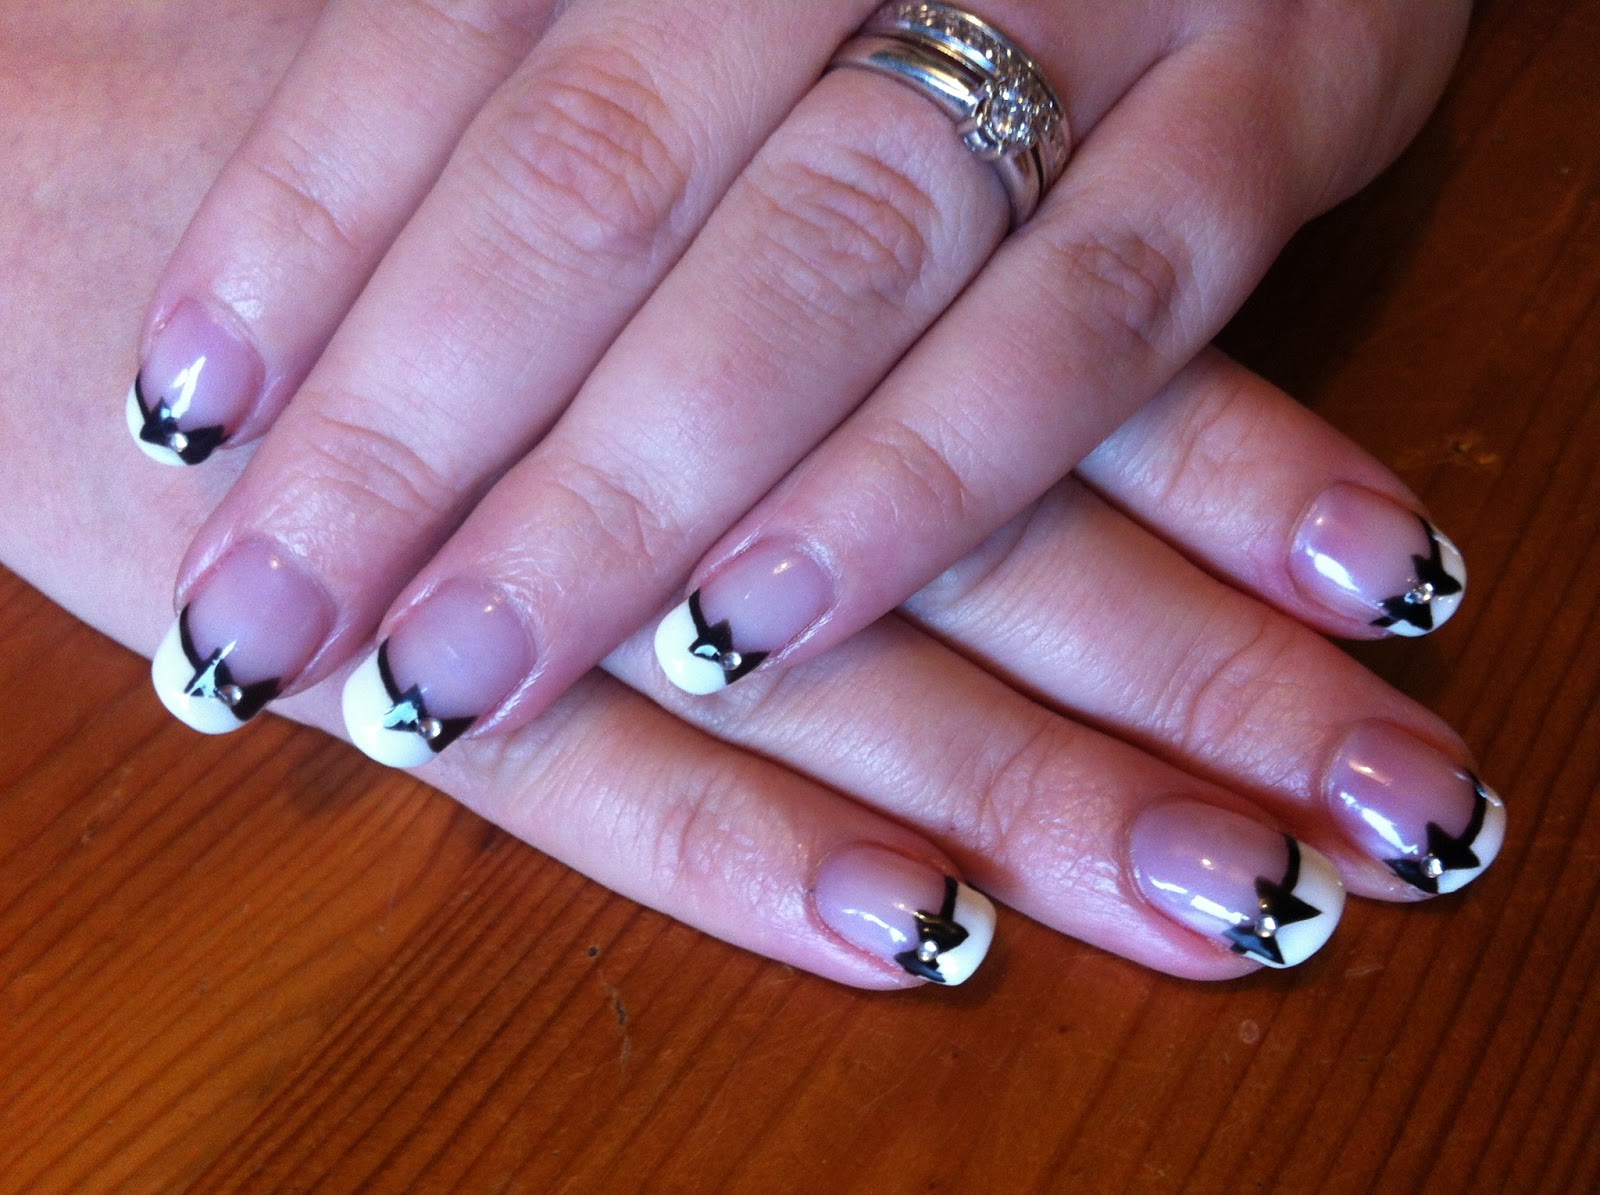 6. CND Shellac Nail Art Tutorial: French Manicure - wide 5